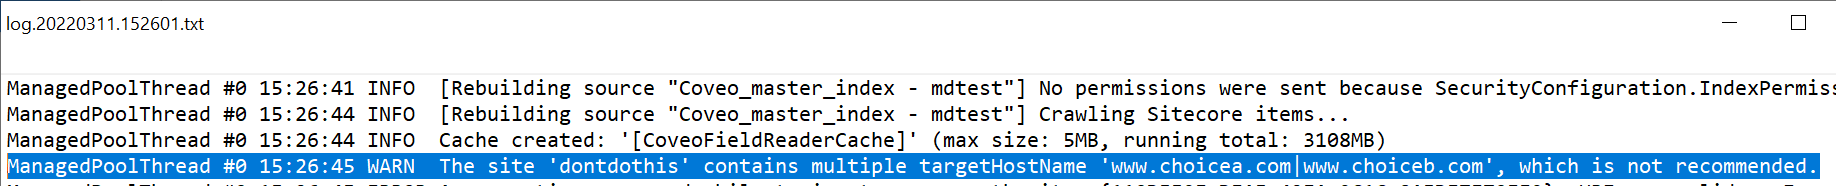 Warning shown by Coveo for Sitecore for multi TargetHostName sites